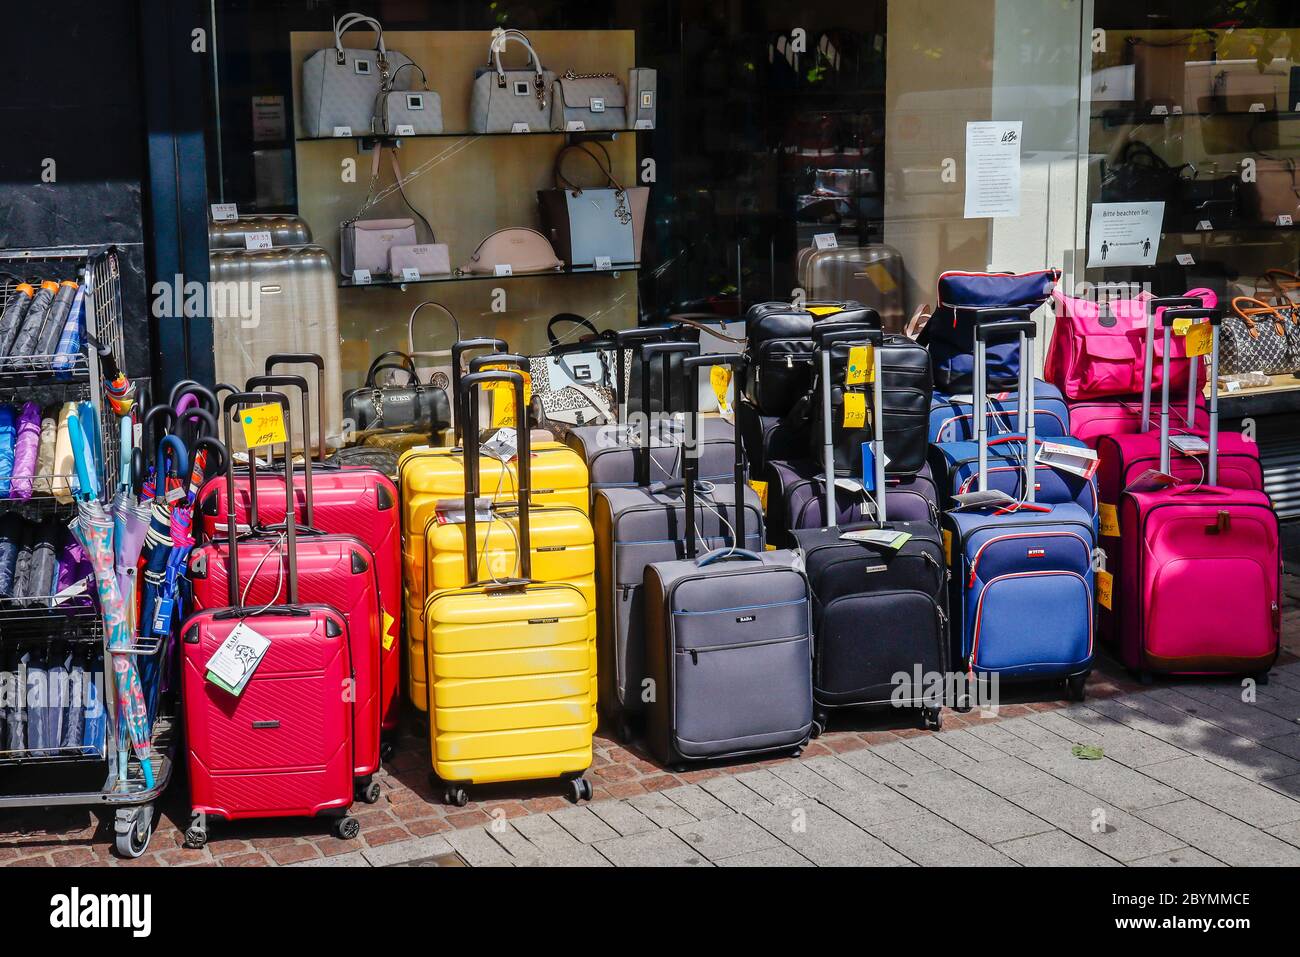 Suitcase Shop High Resolution Stock Photography and Images - Alamy